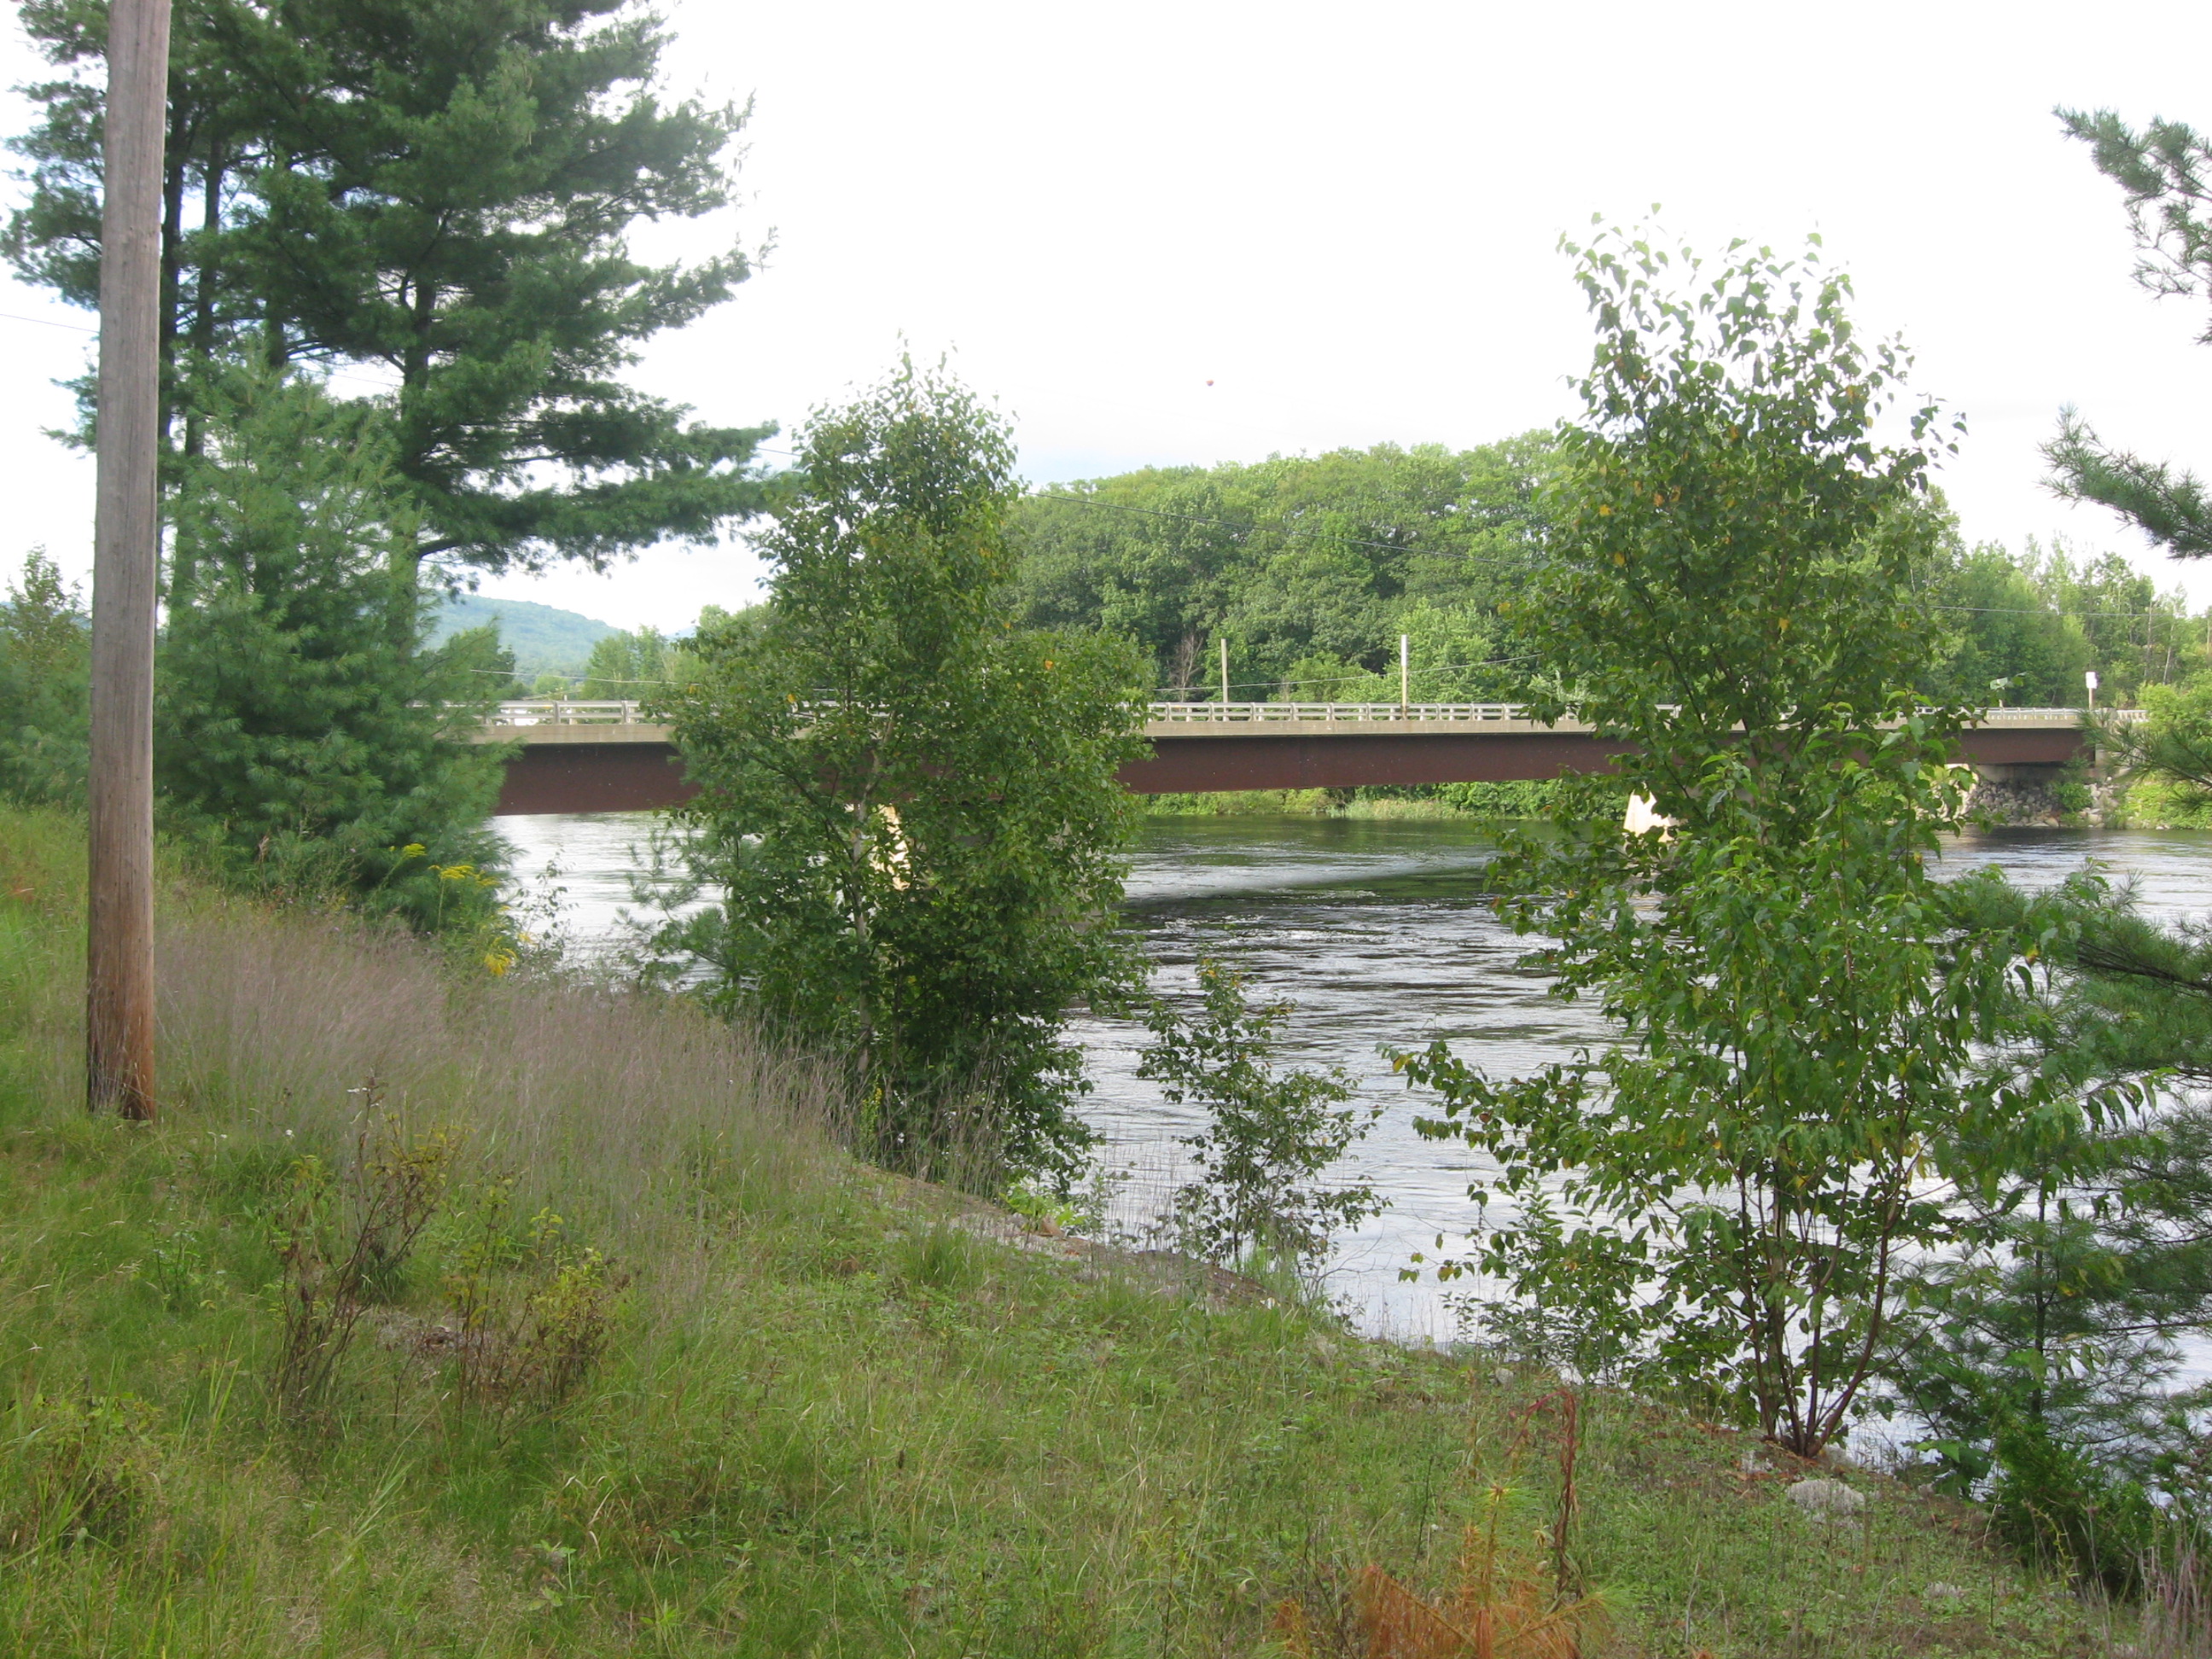 Photograph of the Kennebec River at Bingham, ME (BNGM1)